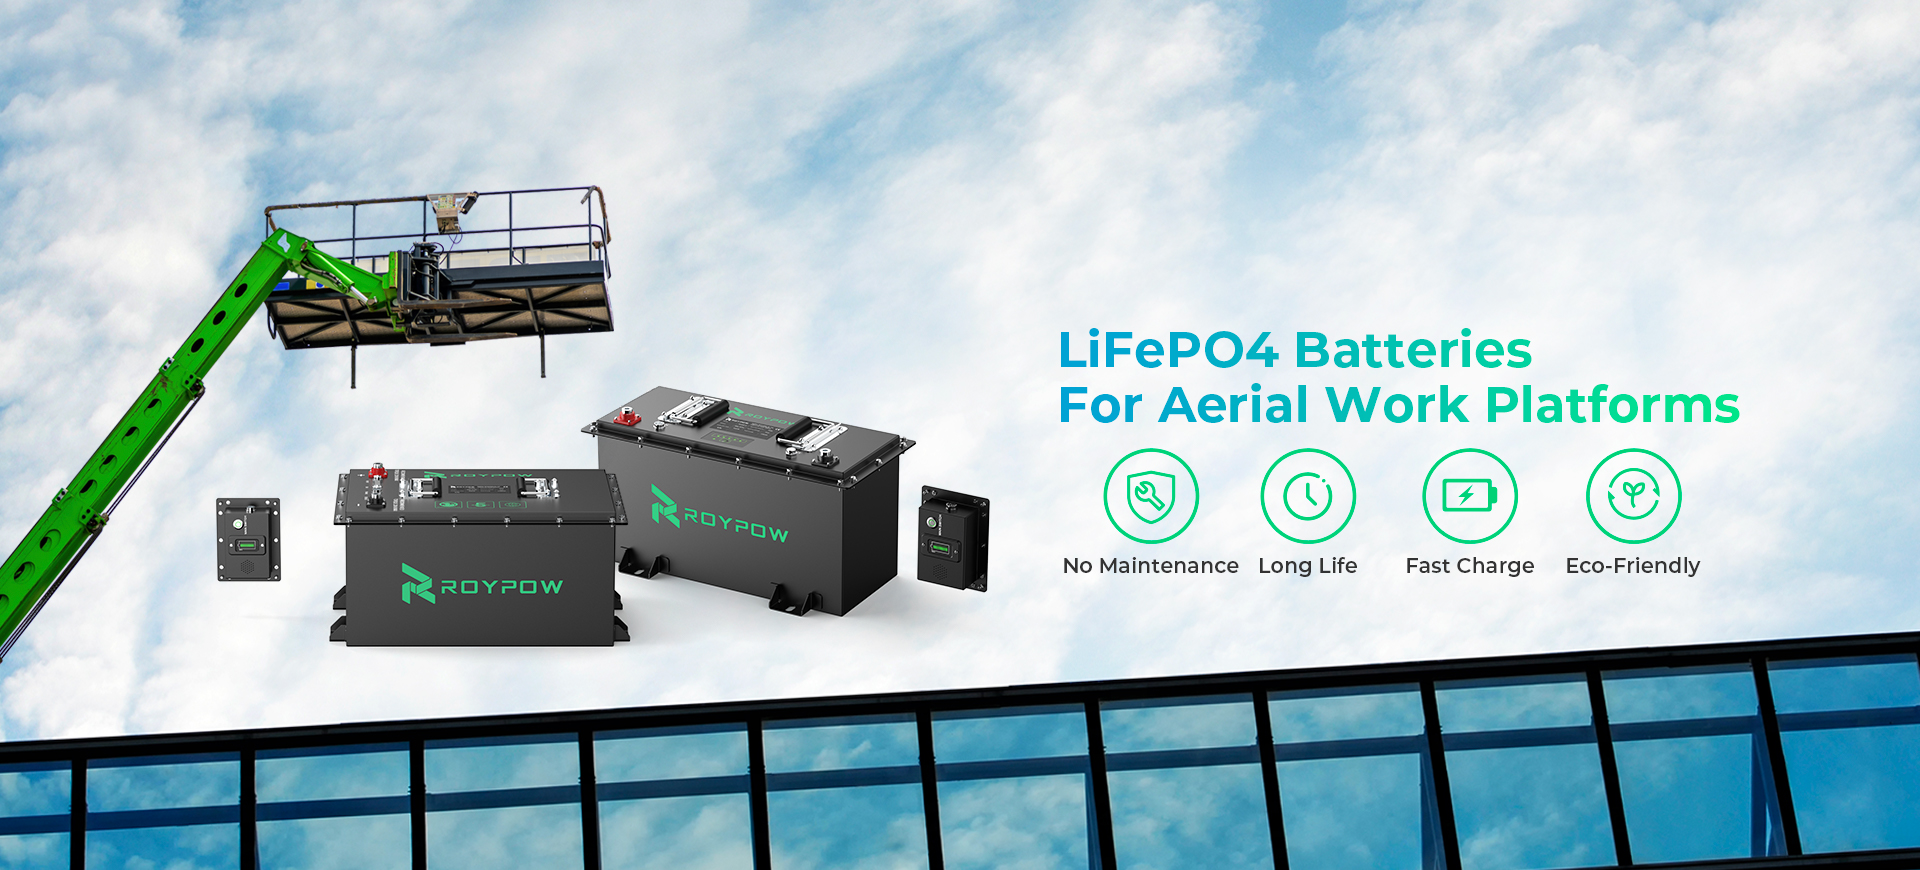 LiFePO4 Batteries for Aerial Work Platforms